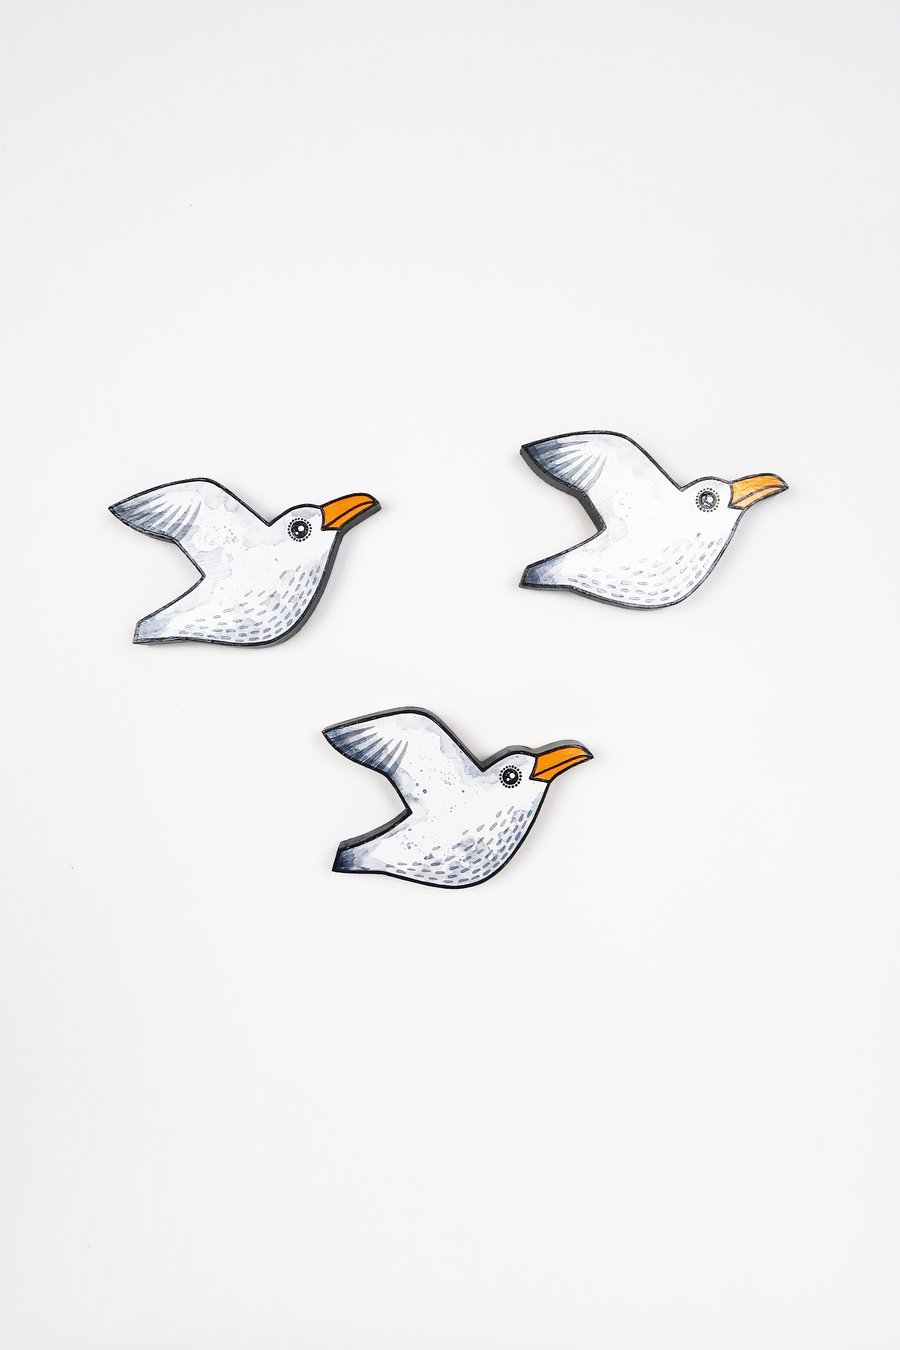 Seagull wall art, set of 3 flying birds, wooden hand painted home decor.